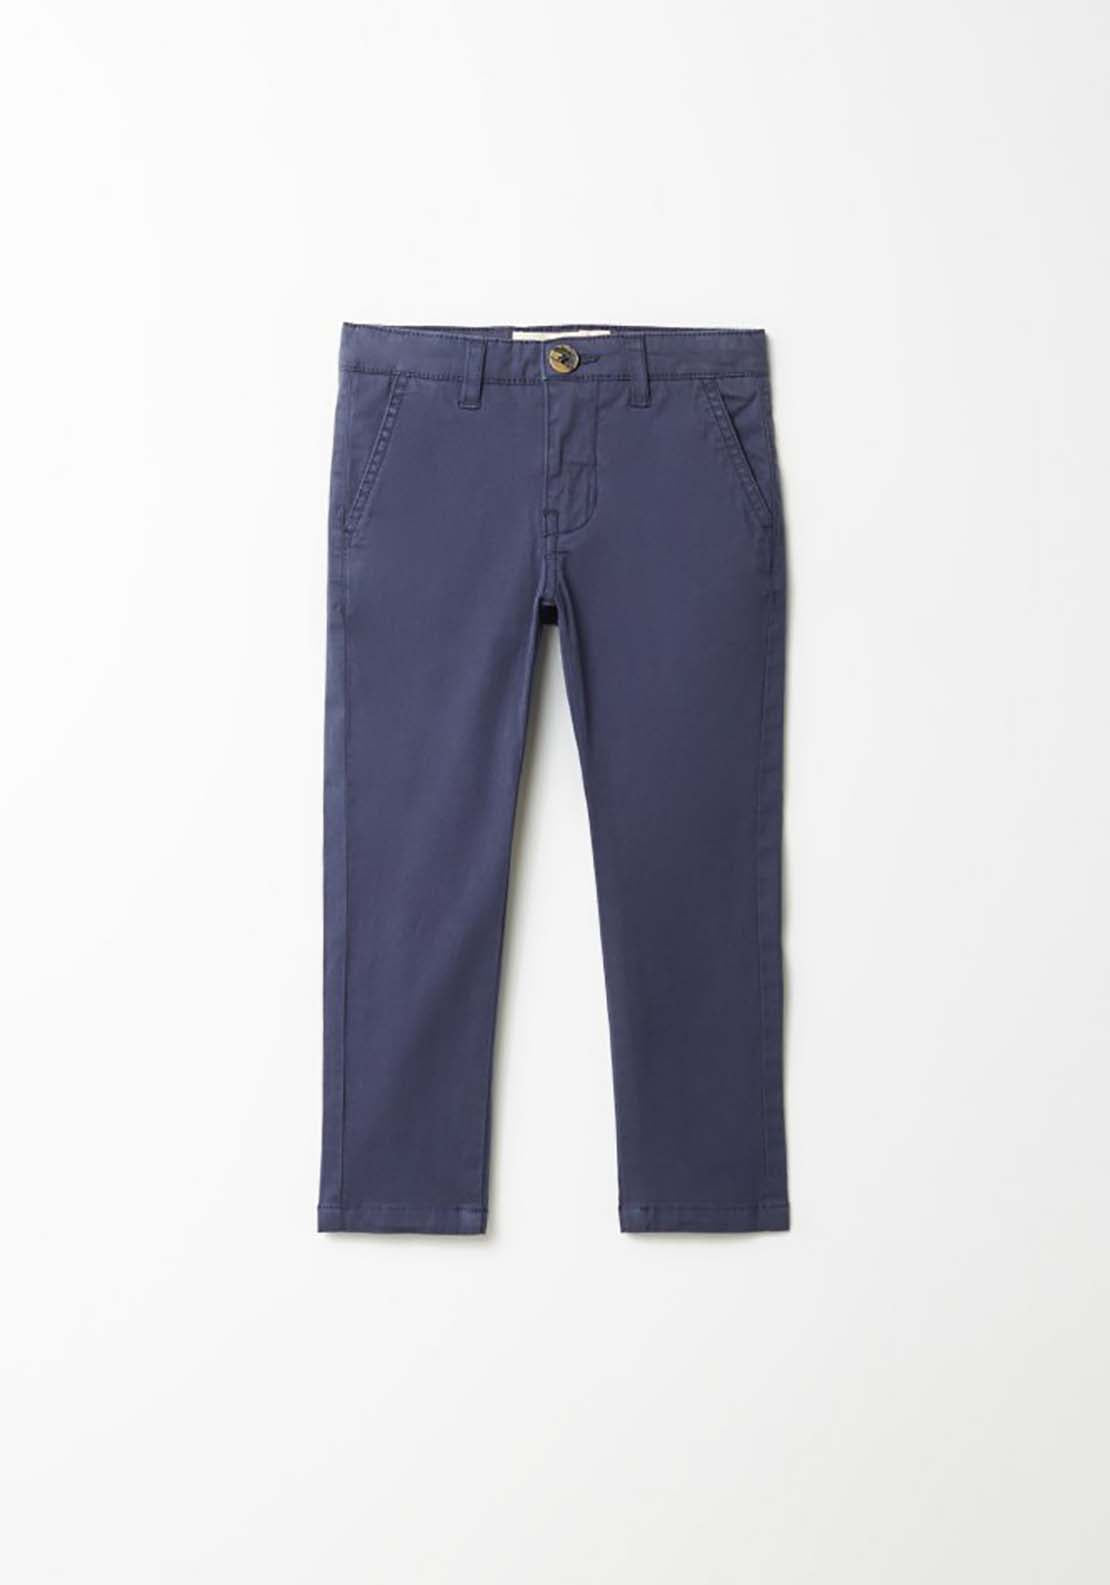 Sfera Formal Plain Trousers - Navy / Blue 1 Shaws Department Stores